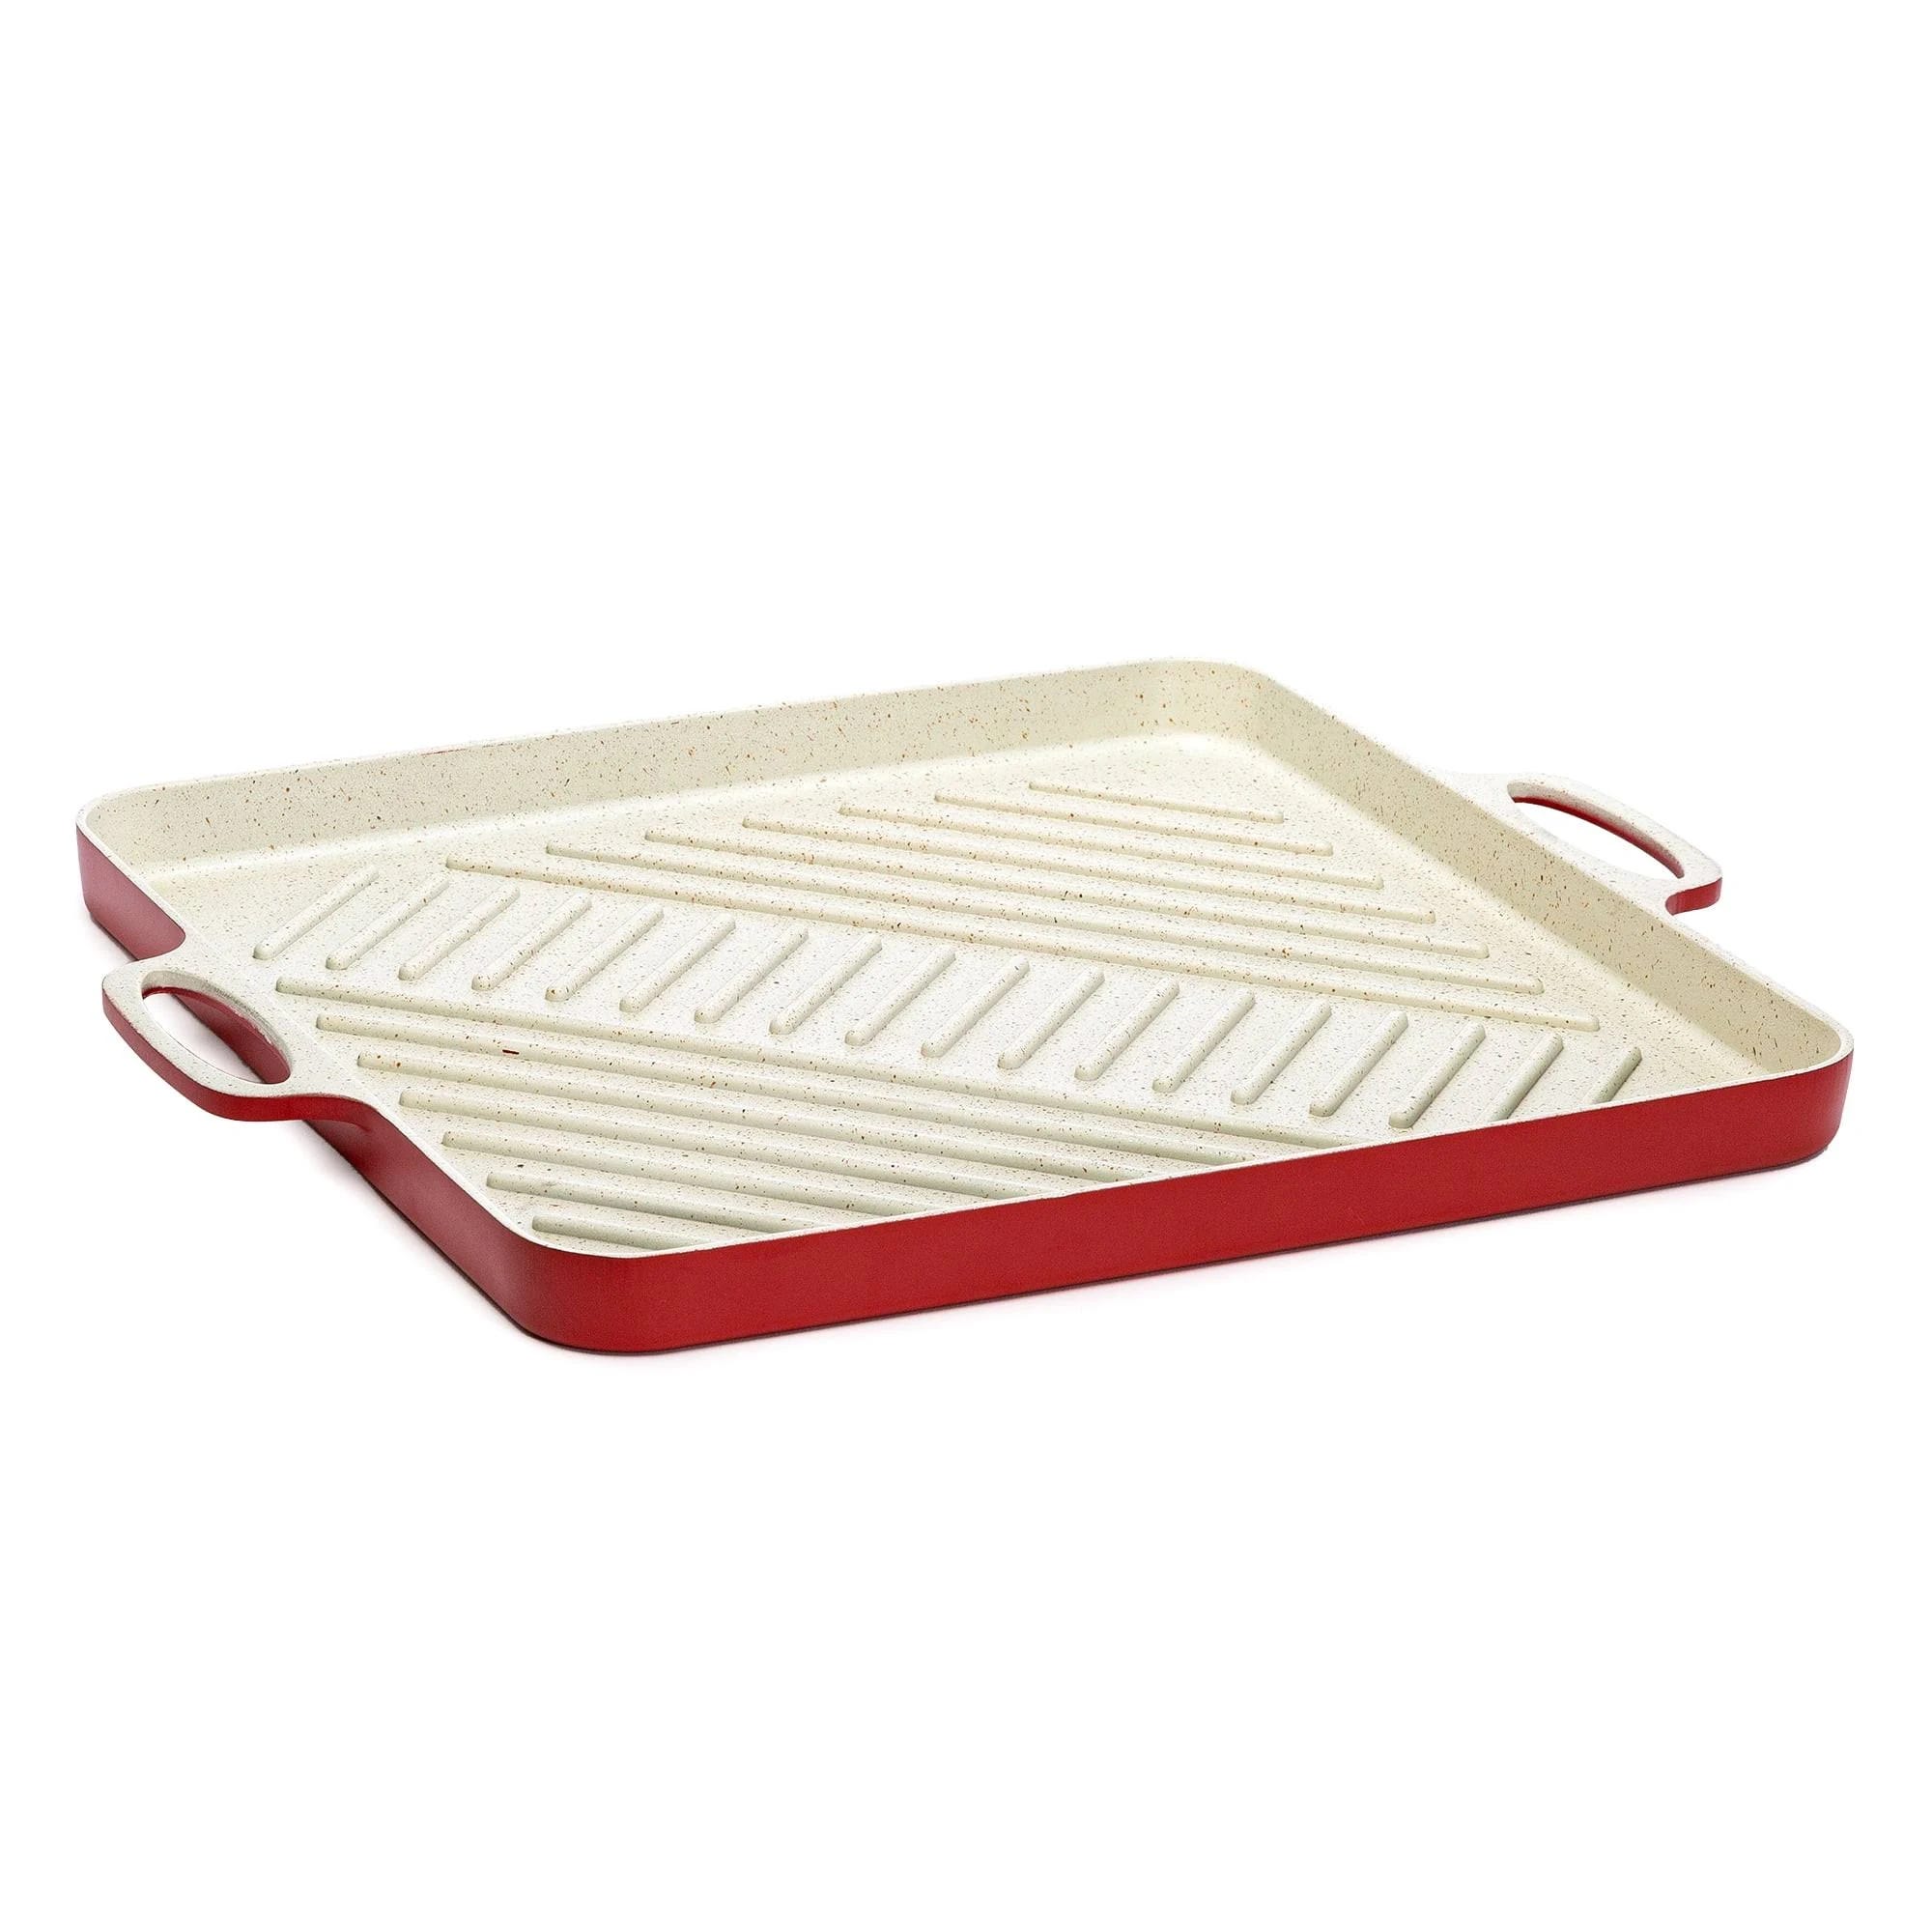 Red Non-Stick Cast Aluminum Griddle Grill Pan (12